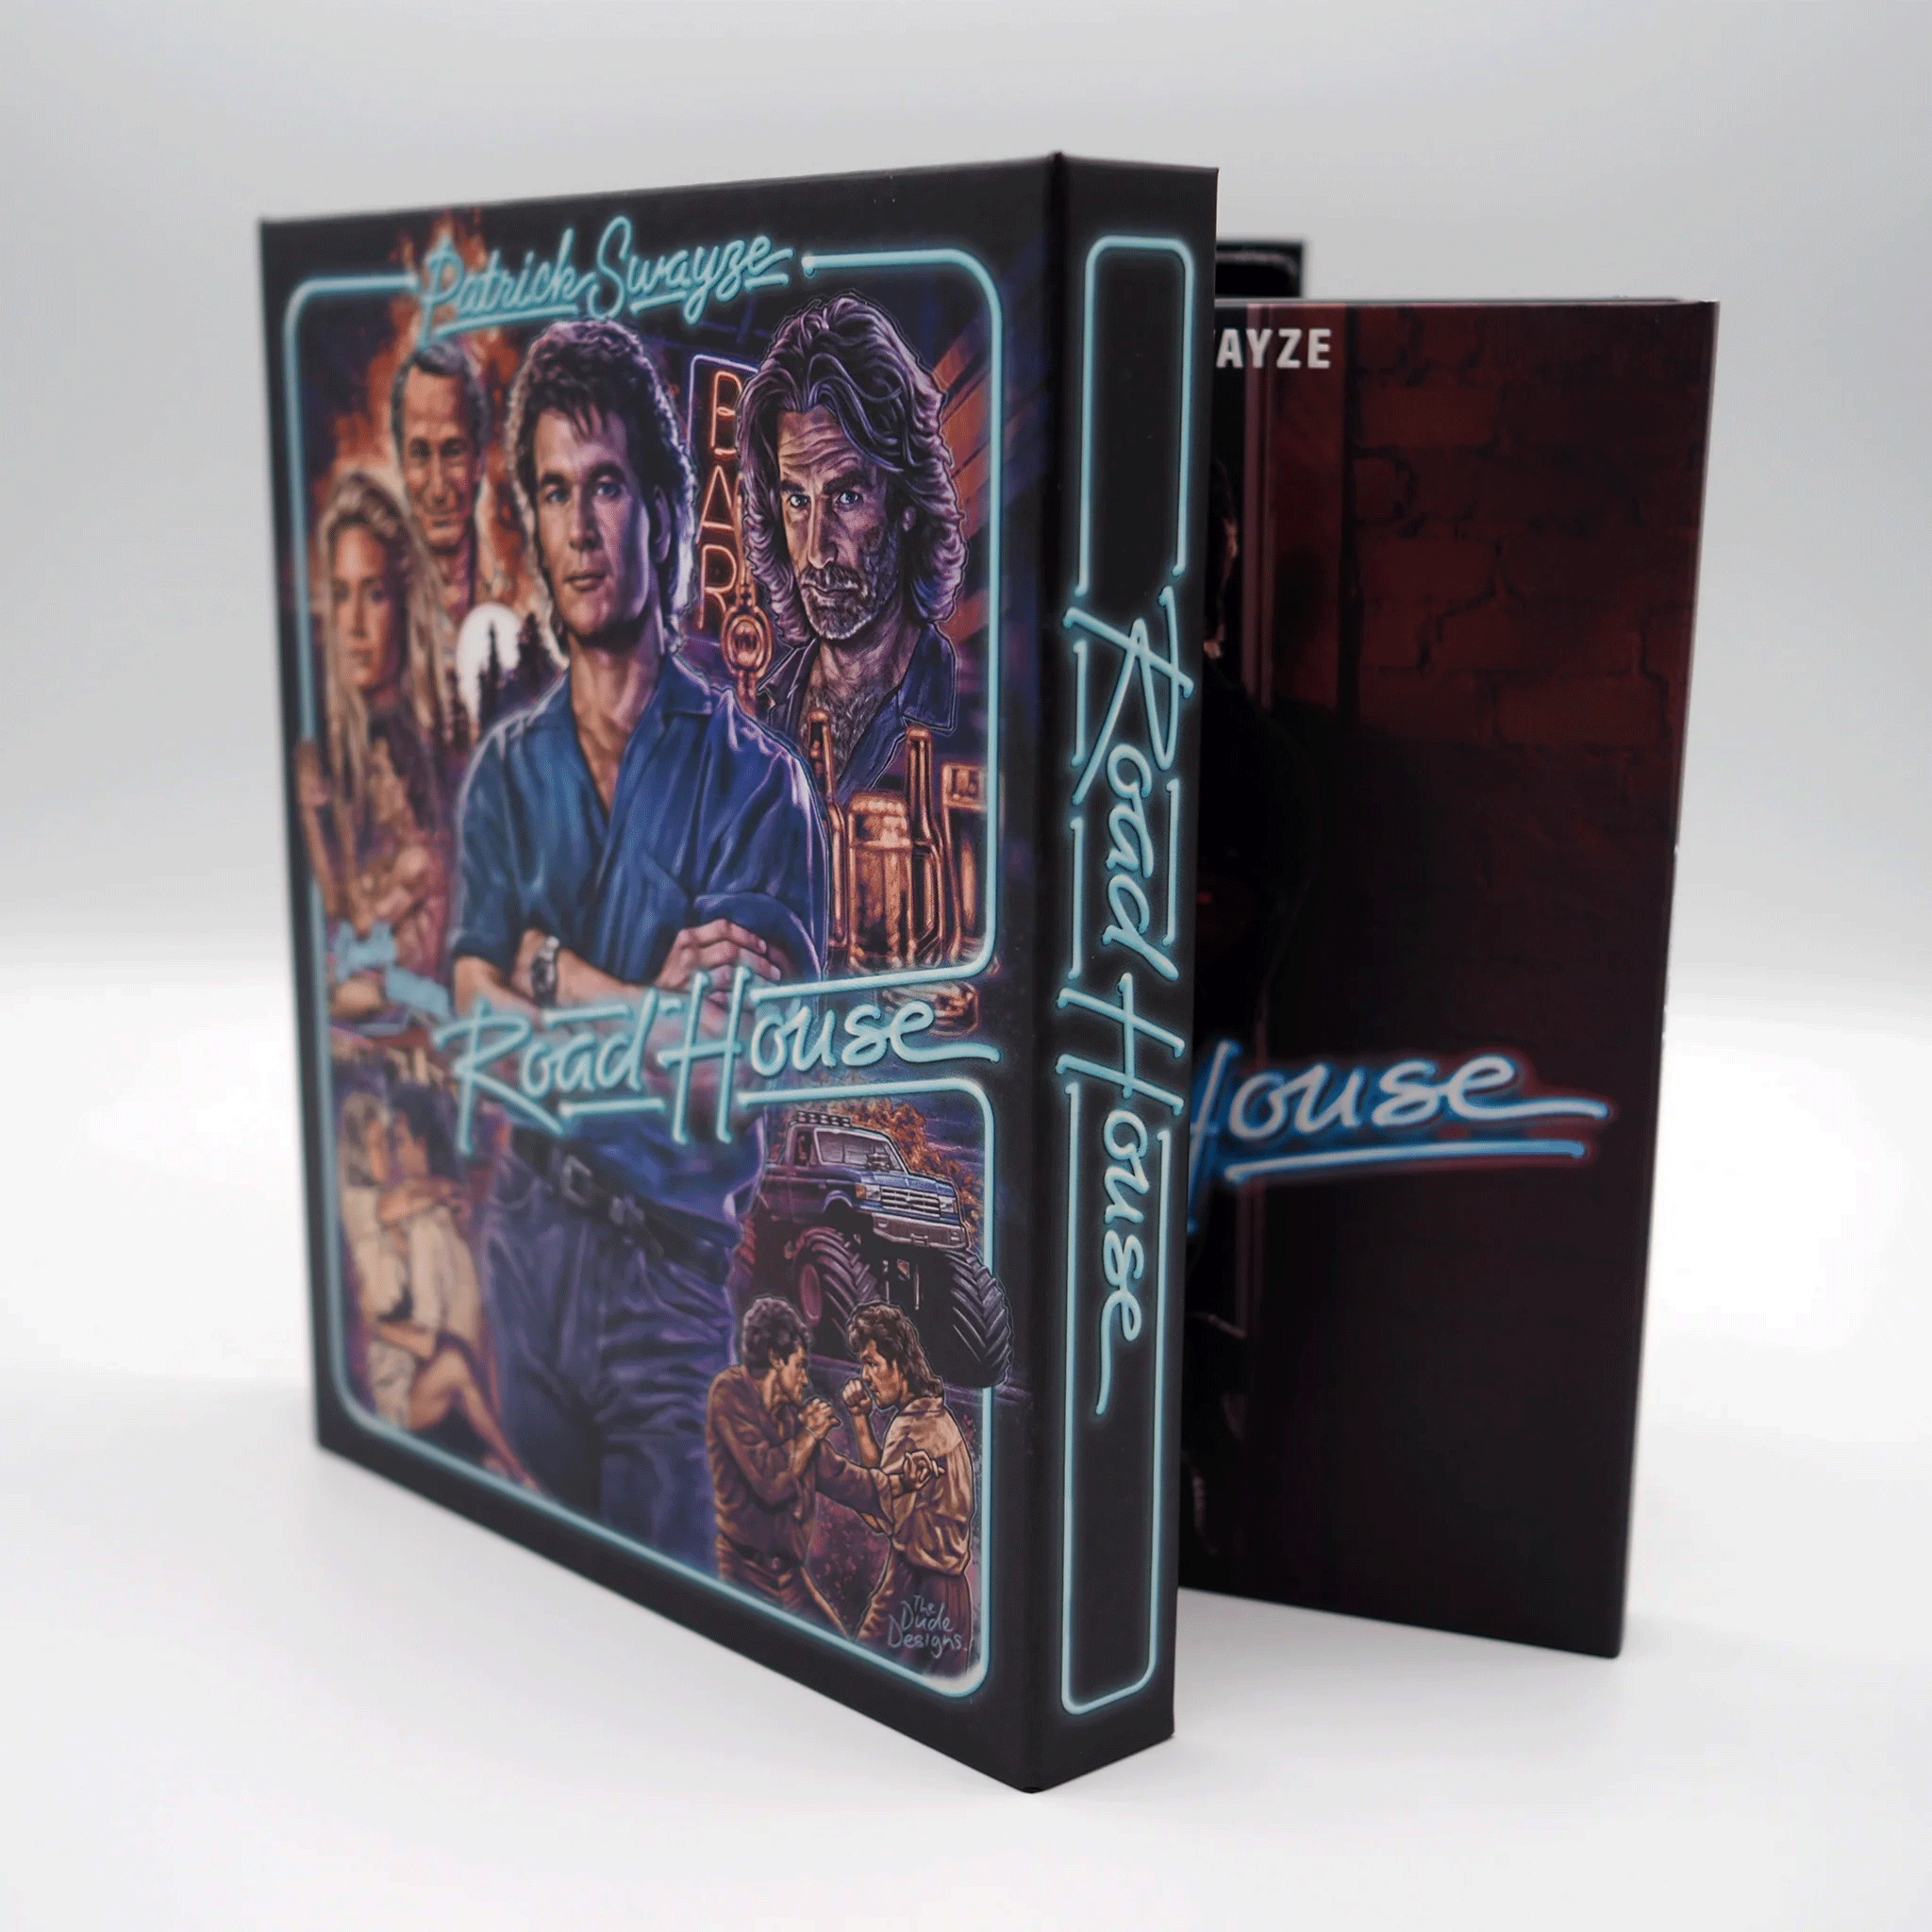 ROAD HOUSE - 4K ULTRA HD / BLU-RAY (LIMITED EDITION)